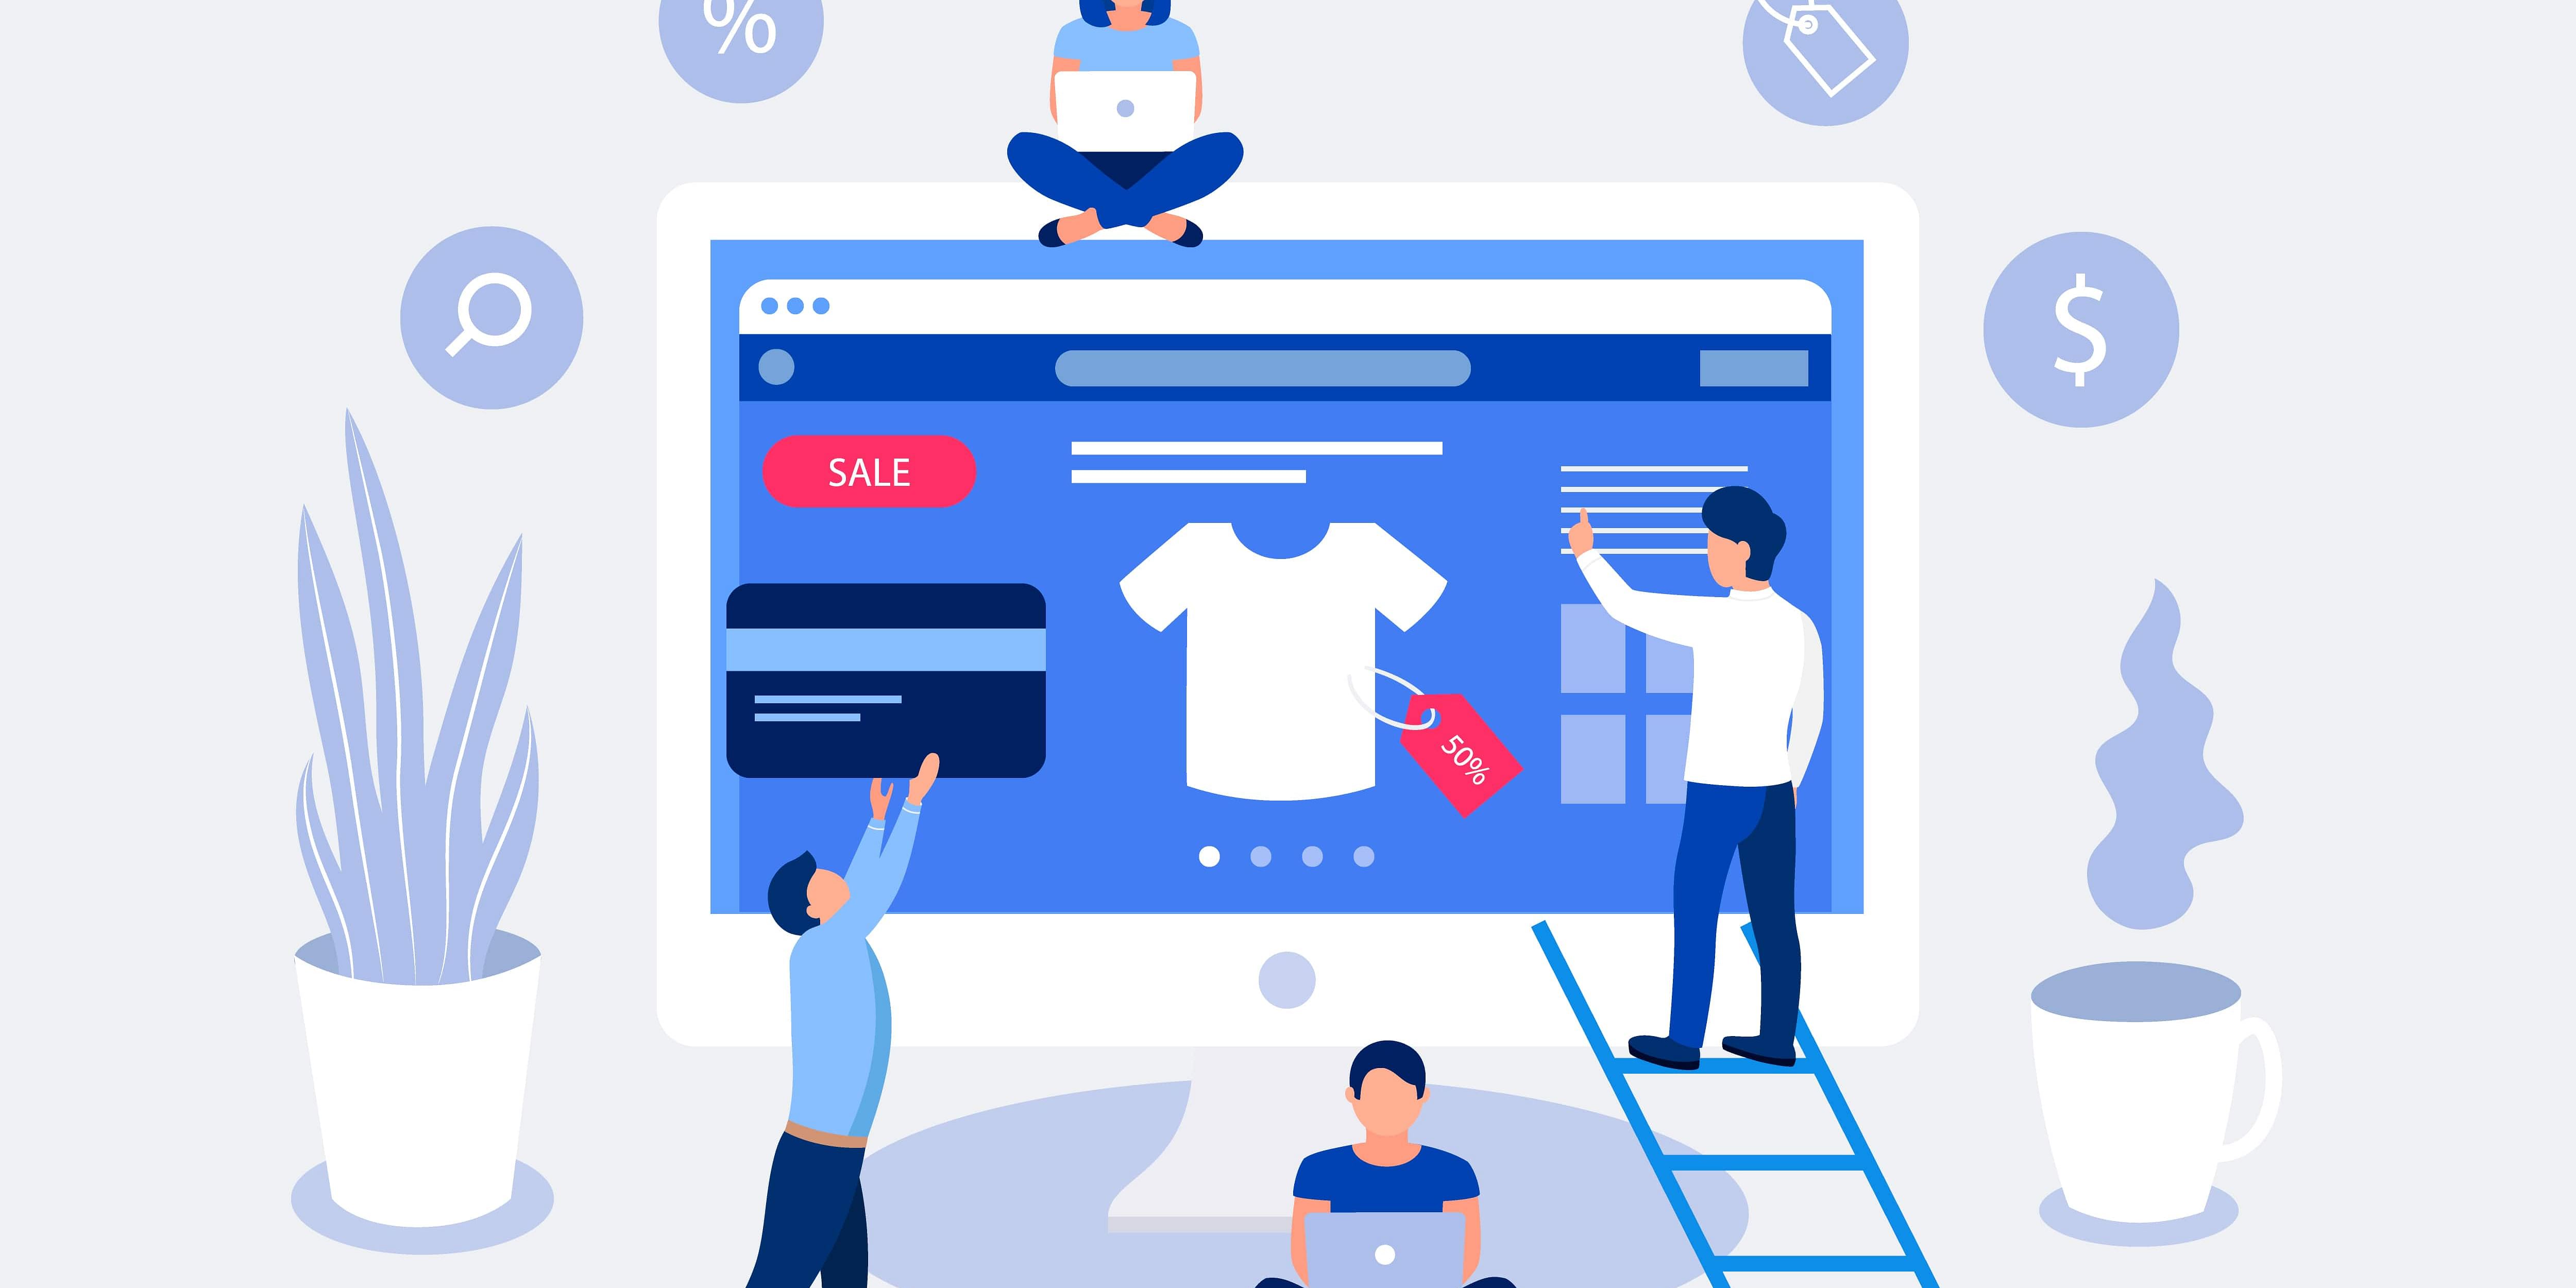 Set up a Successful Ecommerce Store